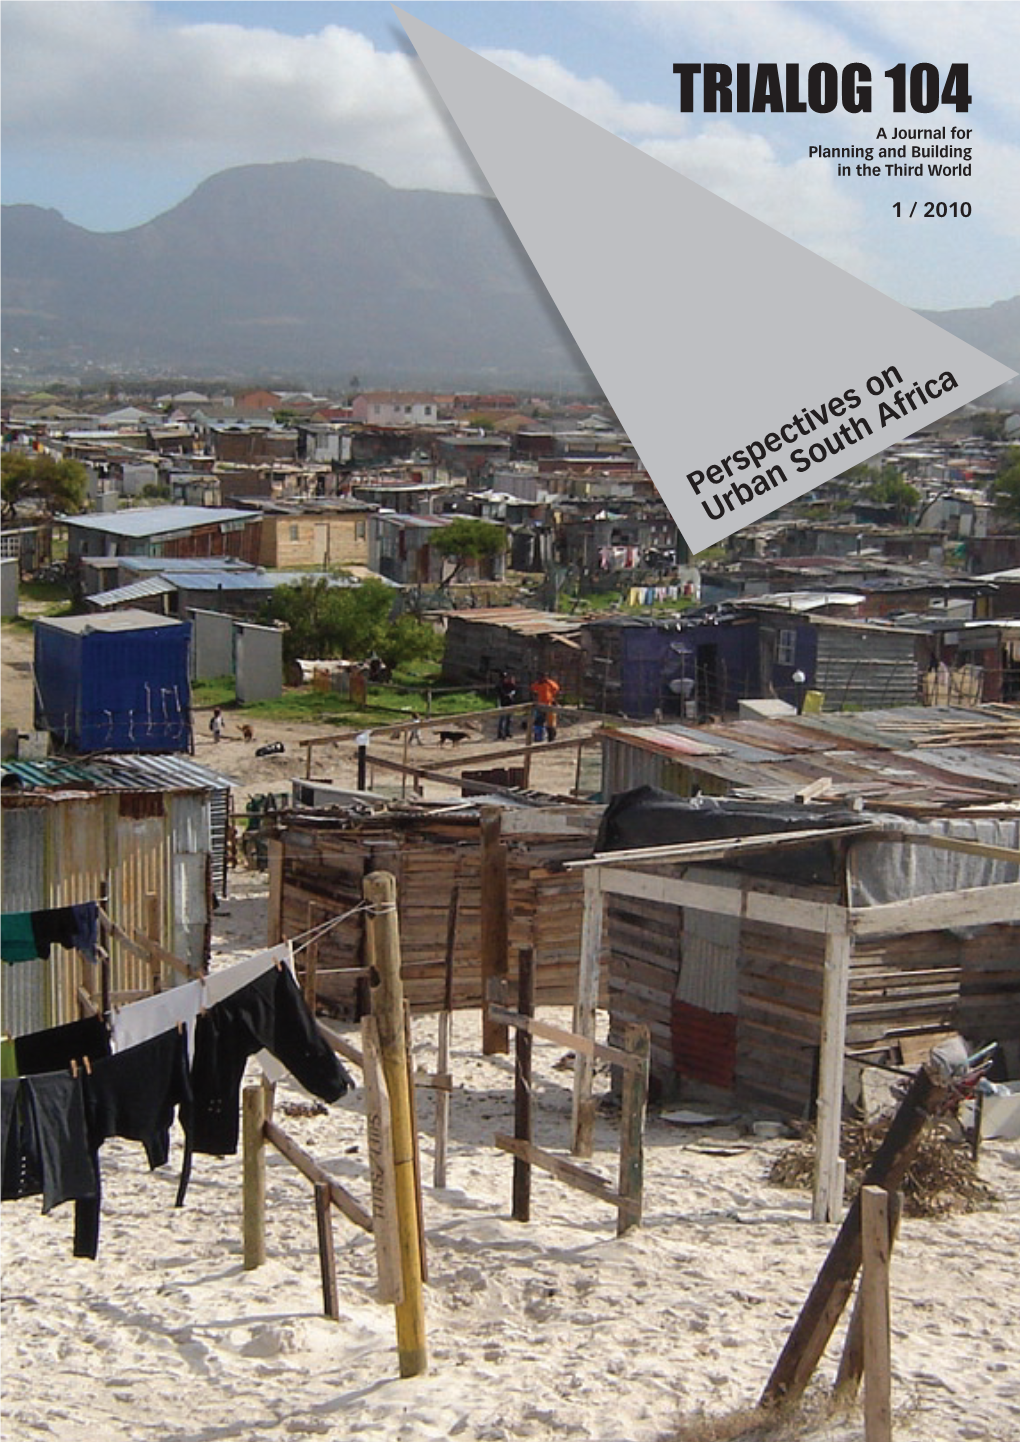 TRIALOG 104 a Journal for Planning and Building in the Third World